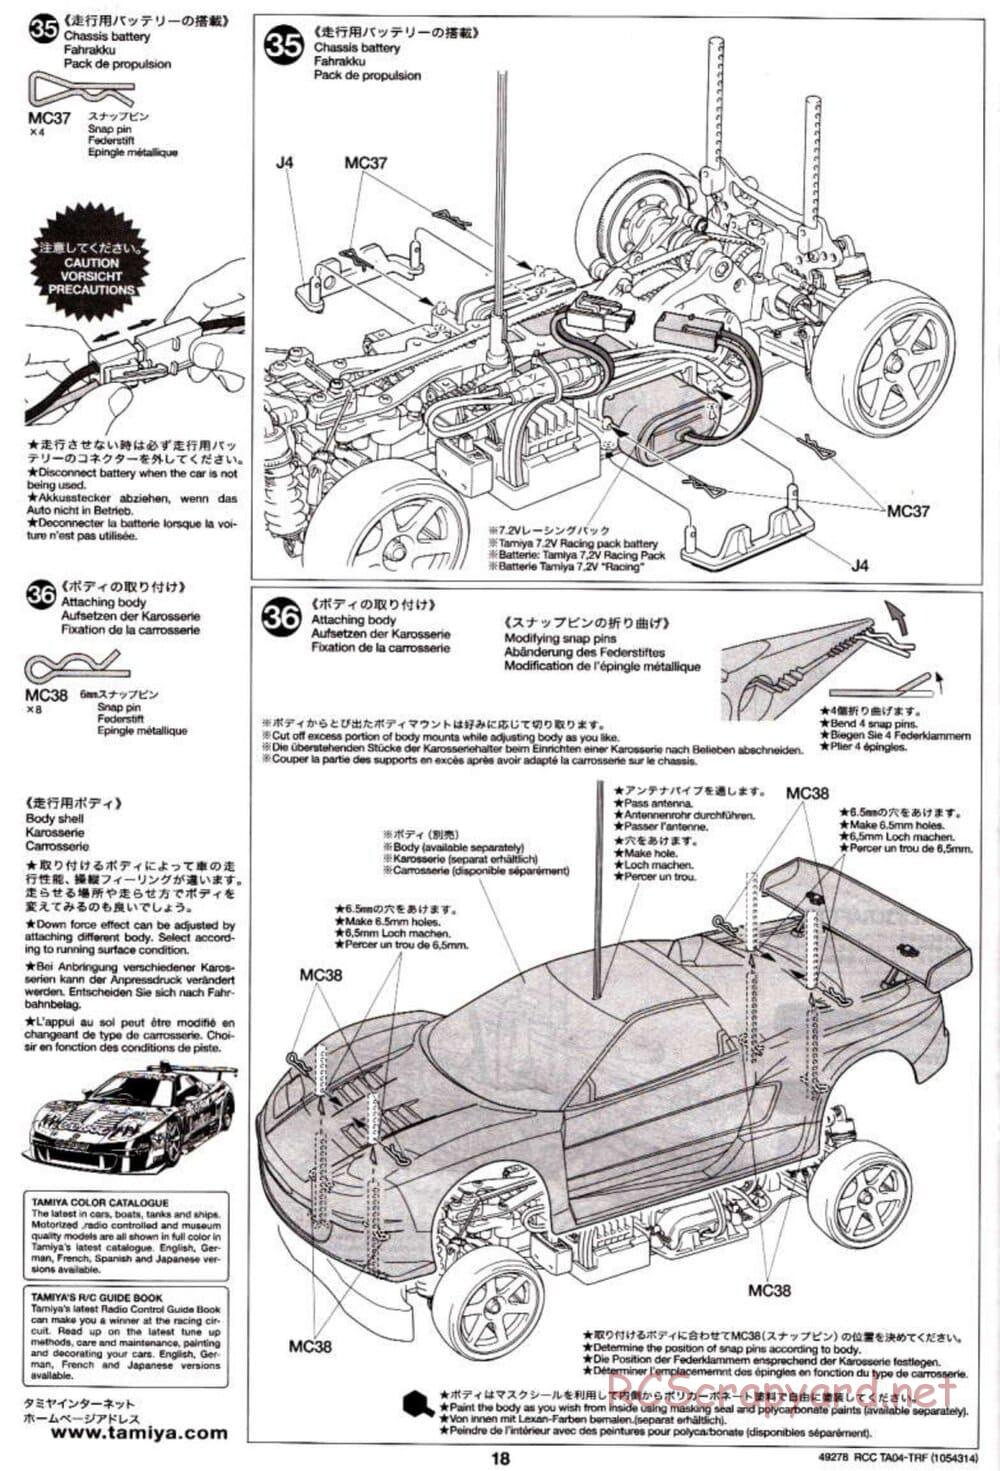 Tamiya - TA-04 TRF Special Chassis Chassis - Manual - Page 18